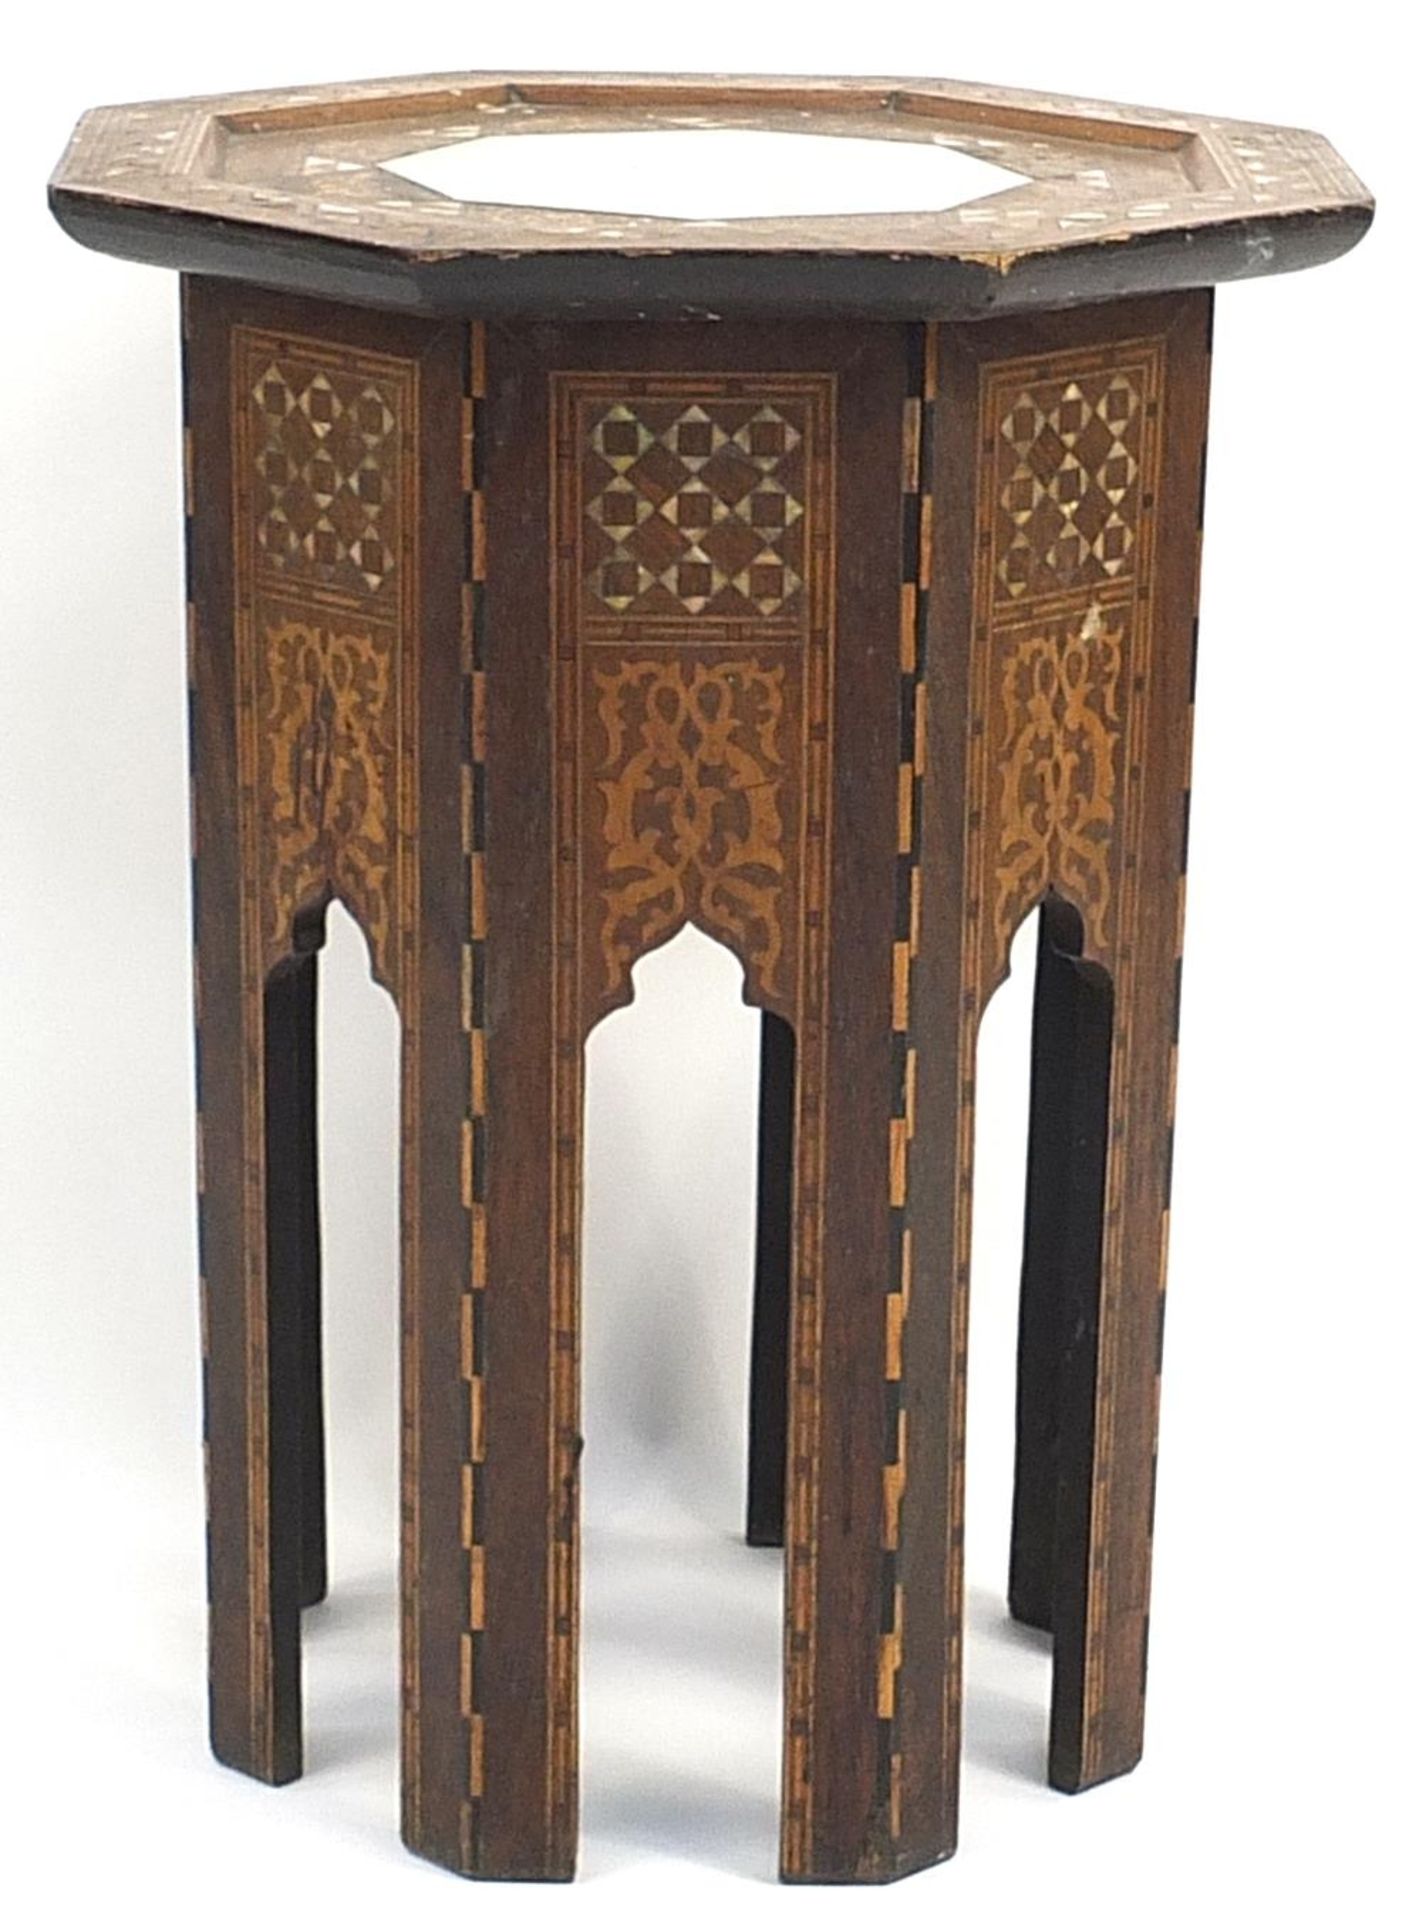 Manner of Liberty & Co, Moorish style inlaid octagonal side table with mother of pearl inlay, 62.5cm